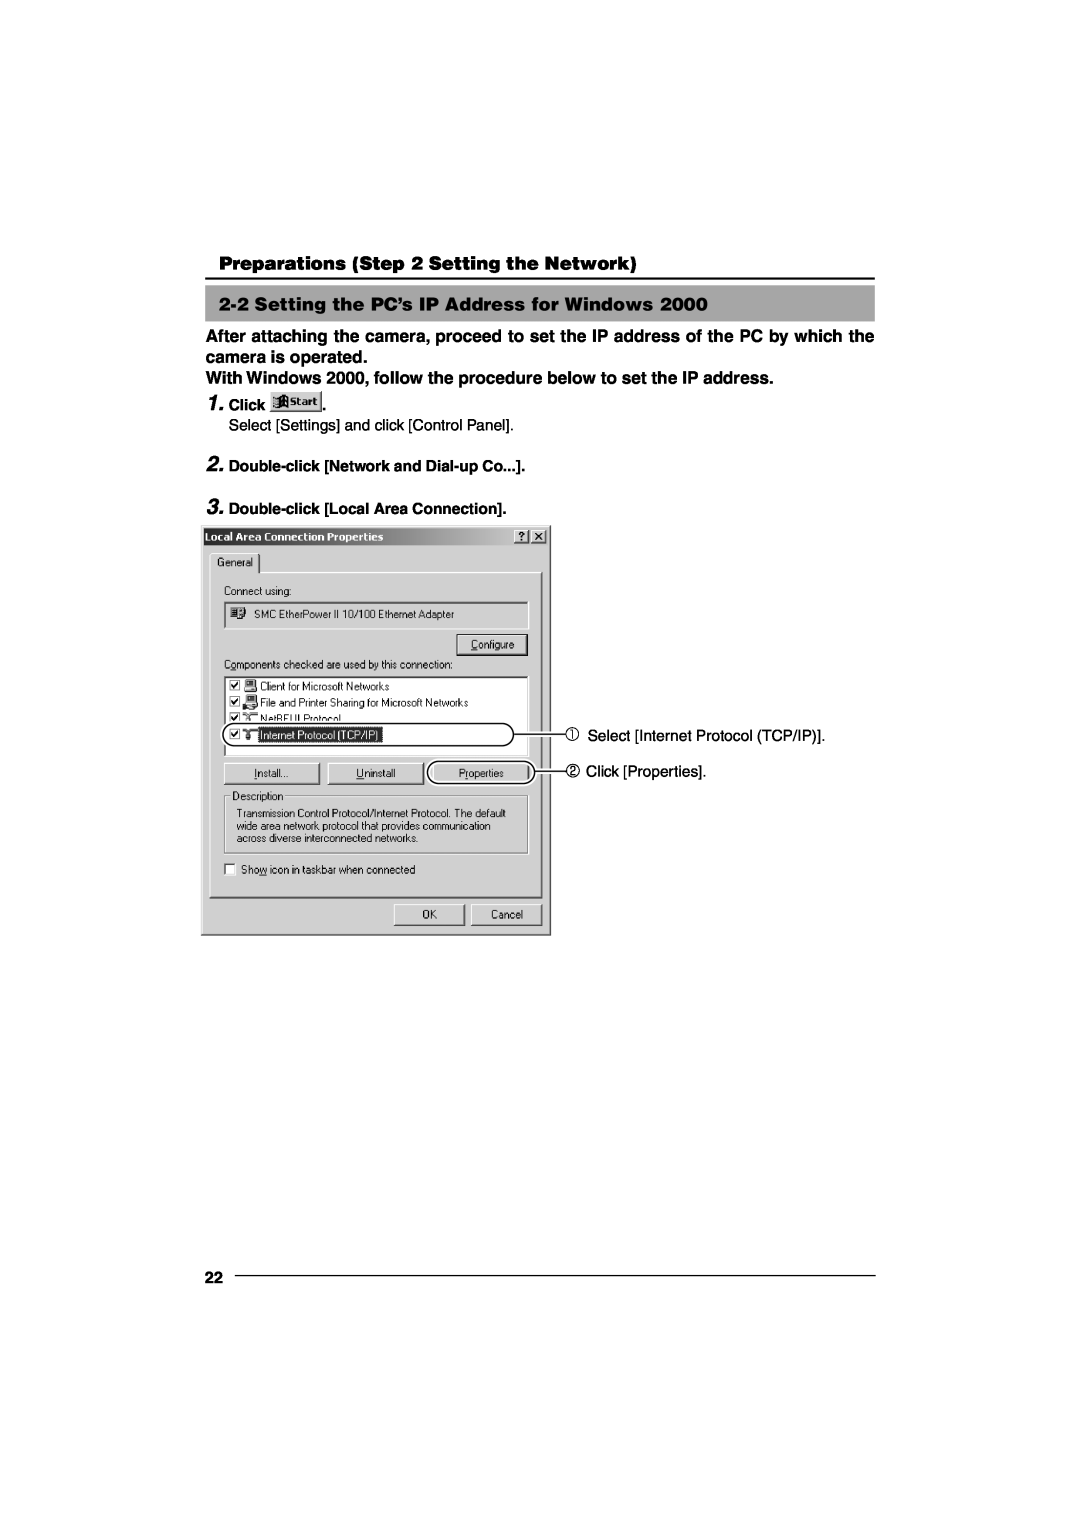 JVC VN-C10 manual 2-2Setting the PC’s IP Address for Windows, Preparations Setting the Network 